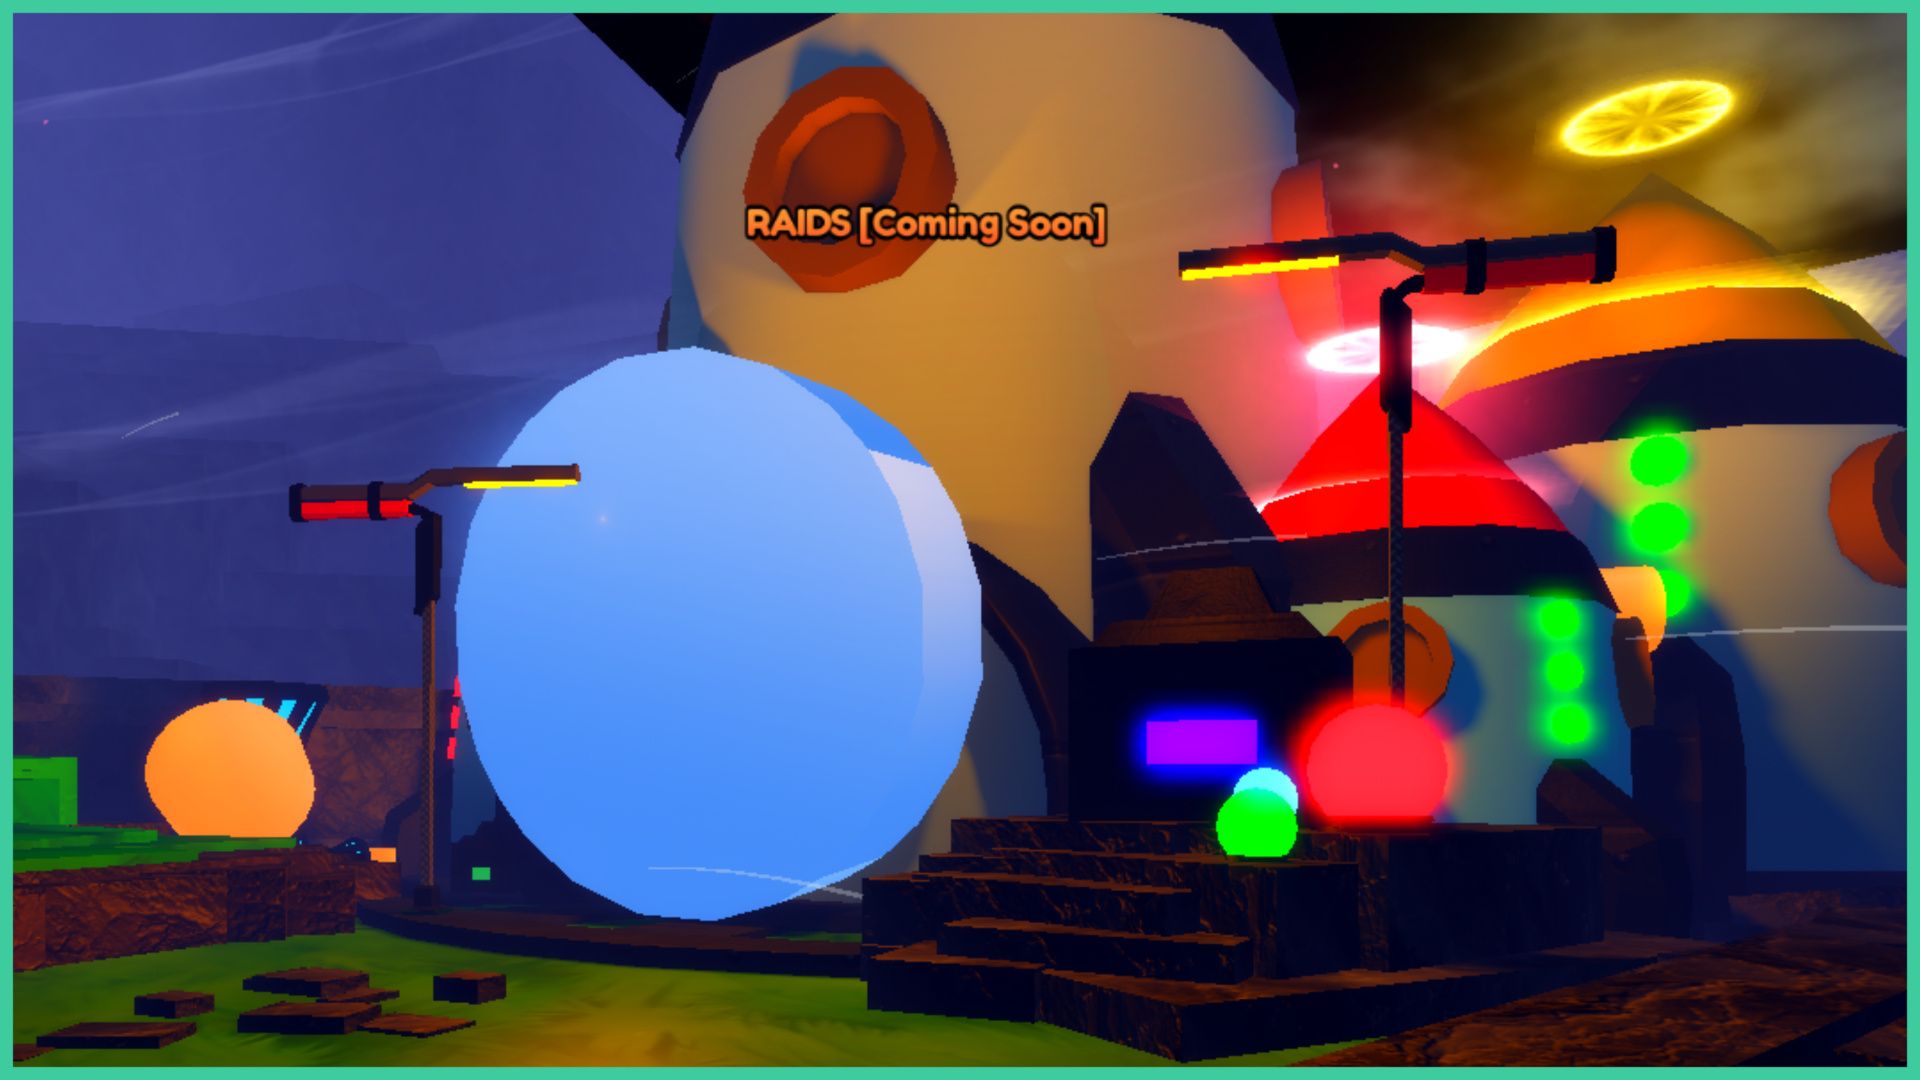 feature image for our anime last stand update 3 codes, the image features a screenshot of the rockets in the raid area with the text 'raids coming soon', there are 3 rockets with 2 smaller ones and glowing orbs on the steps leading up to the rockets, there are also futuristic streetlamps